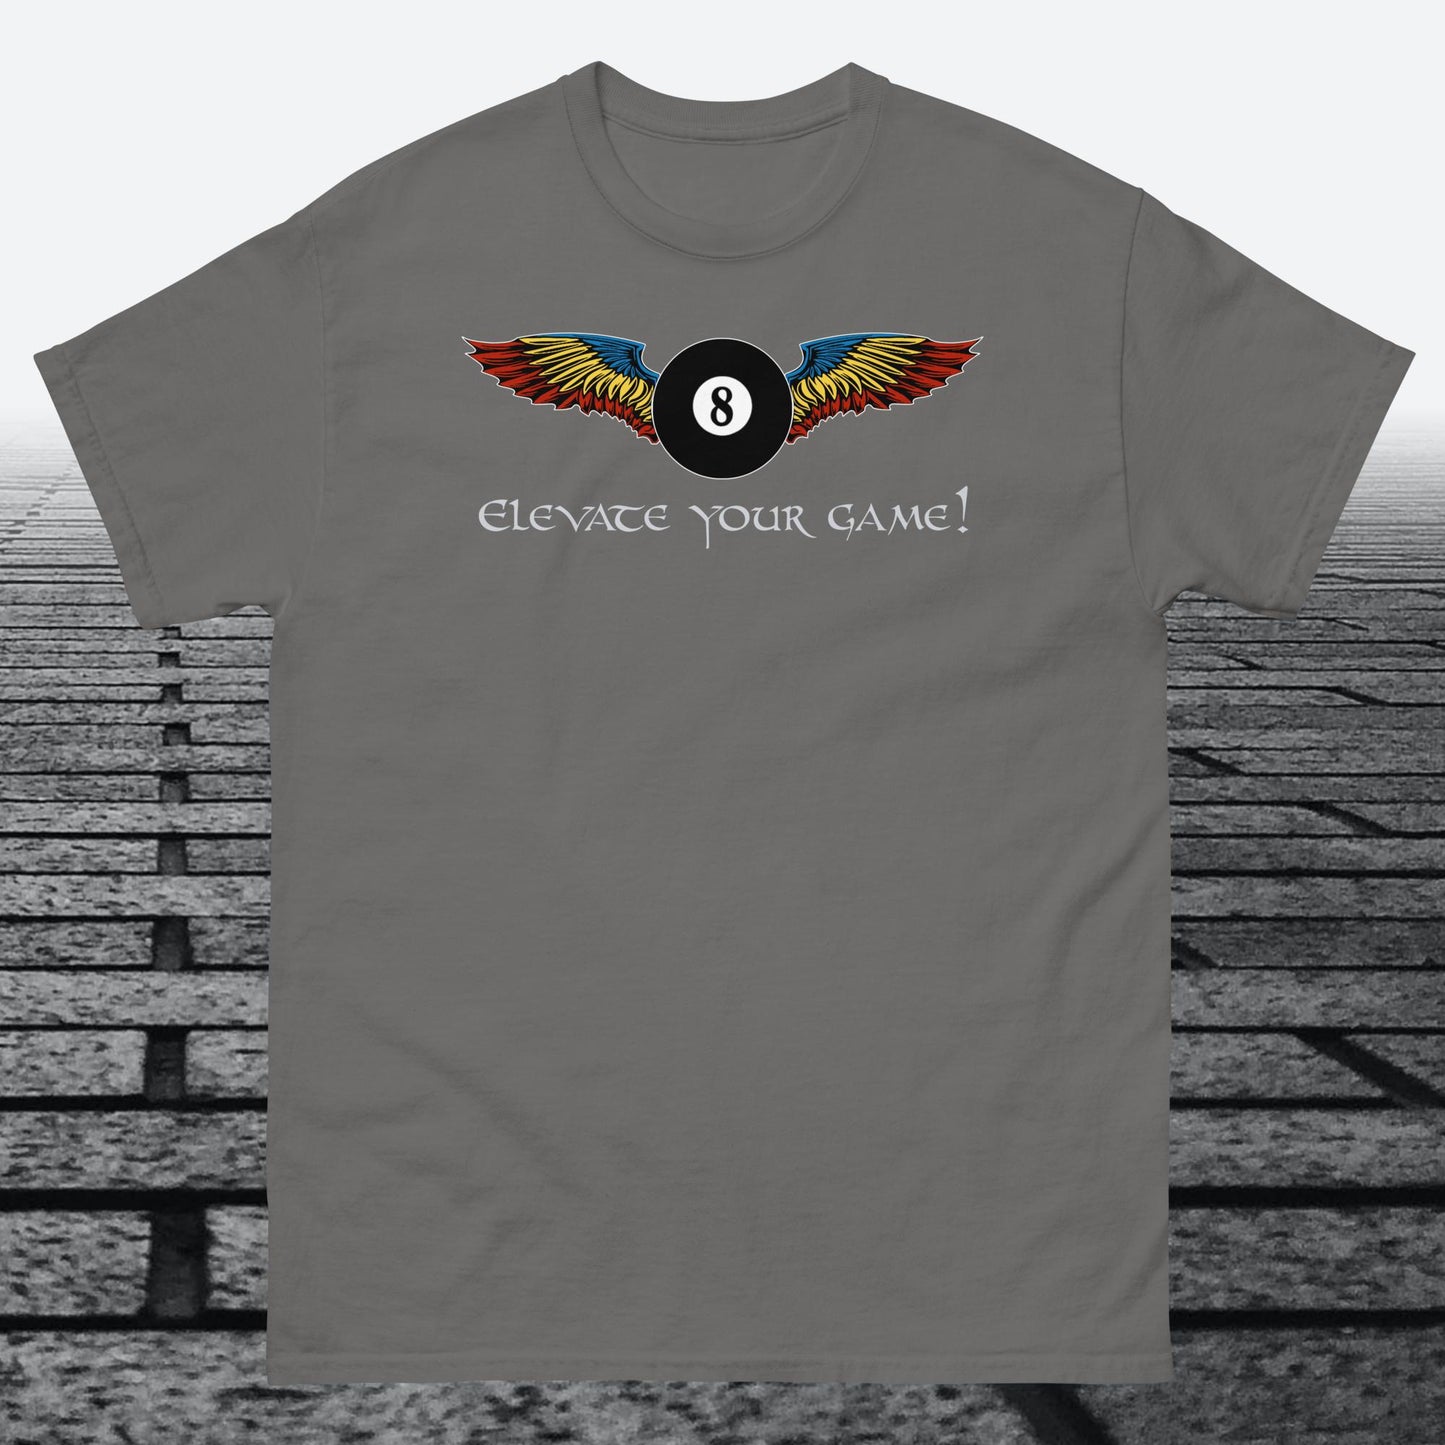 Elevate Your Game, with 8 ball with wings, on front of shirt, Cotton t-shirt